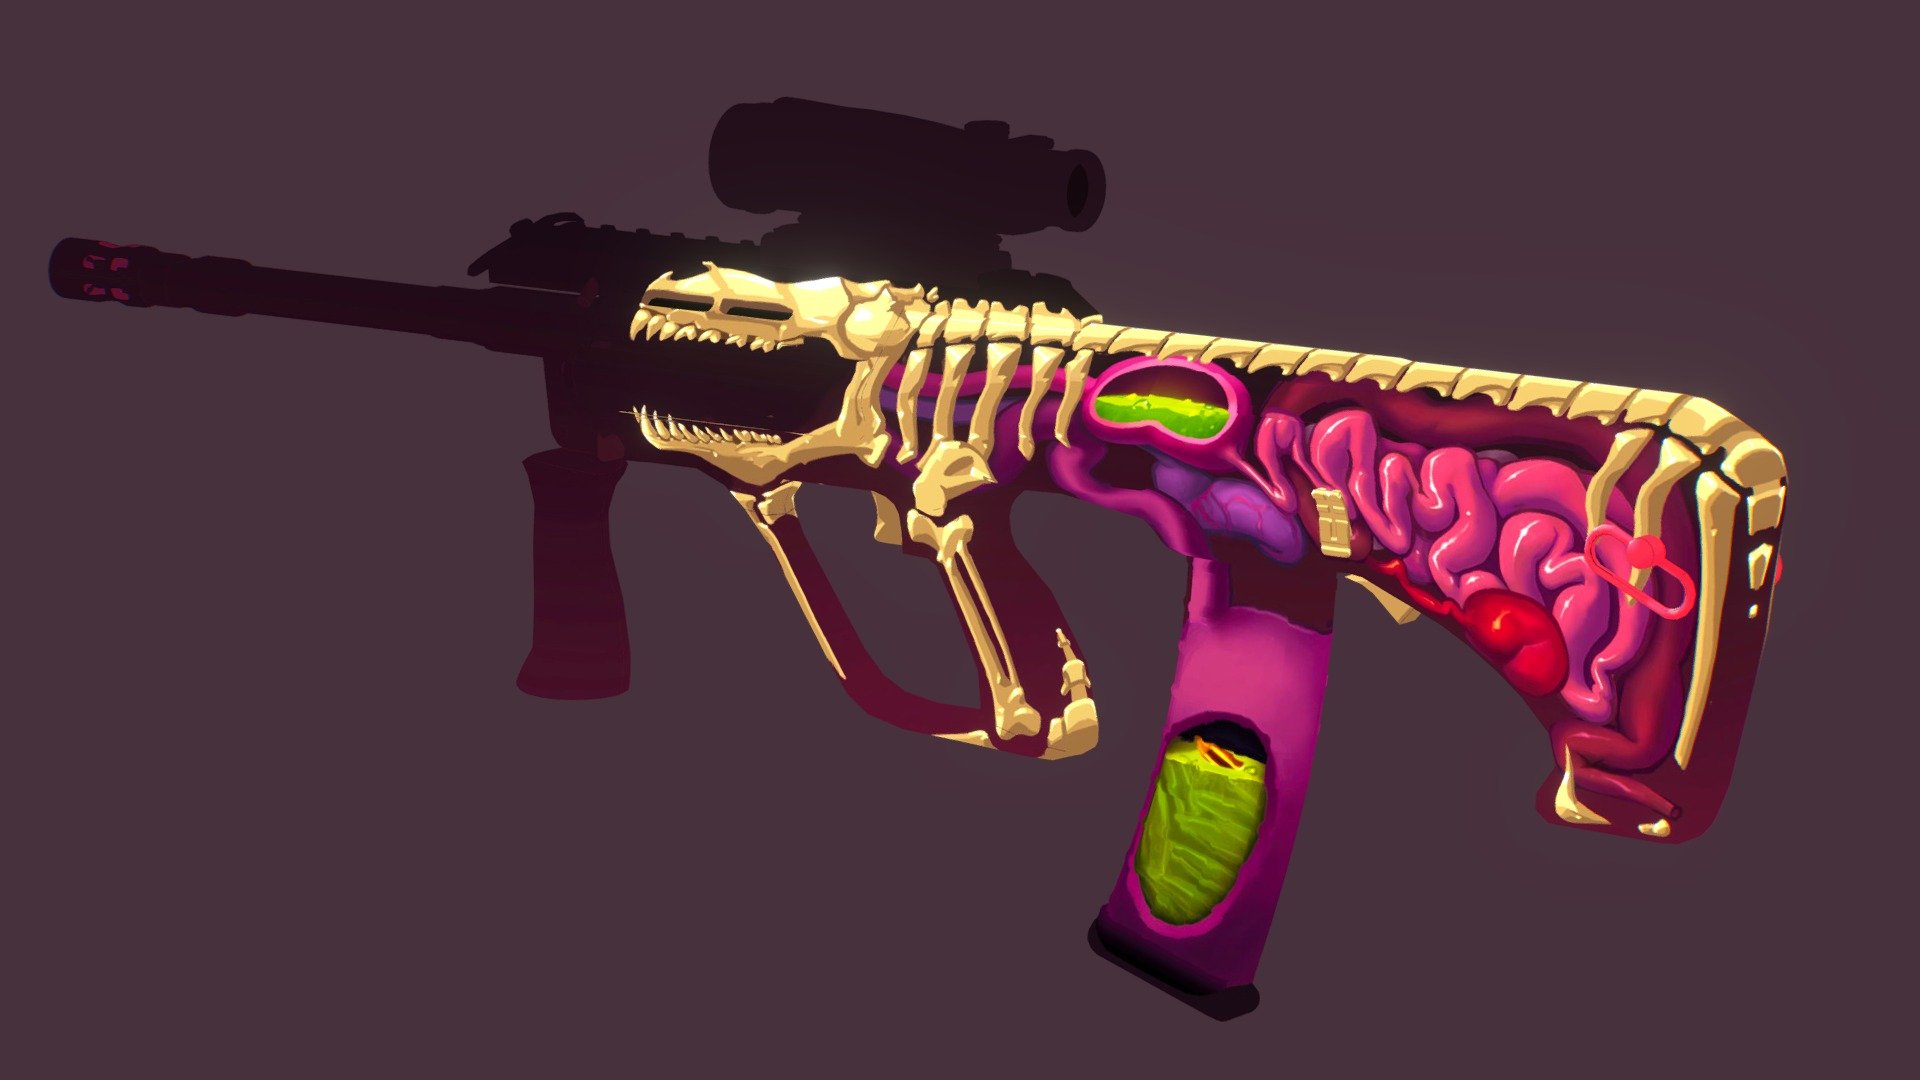 Check it out here: http://steamcommunity.com/sharedfiles/filedetails/?id=763074373

Let me know what you think :) - CS:GO AUG | Huge Guts - 3D model by Sparkwire 3d model